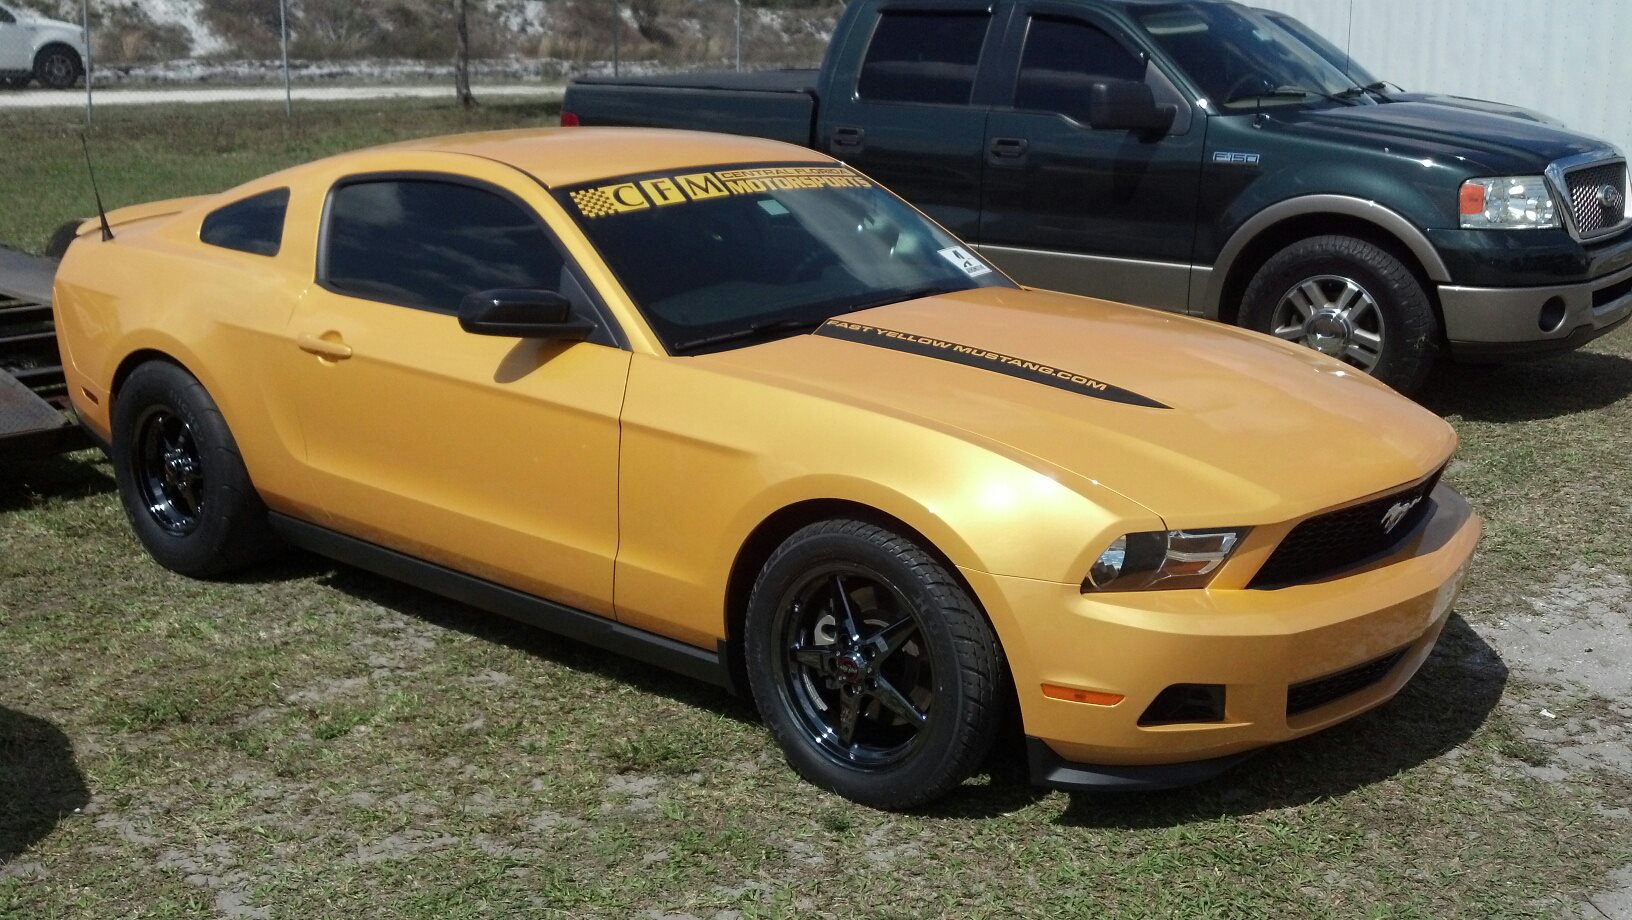 2011 Ford mustang quarter mile times #5